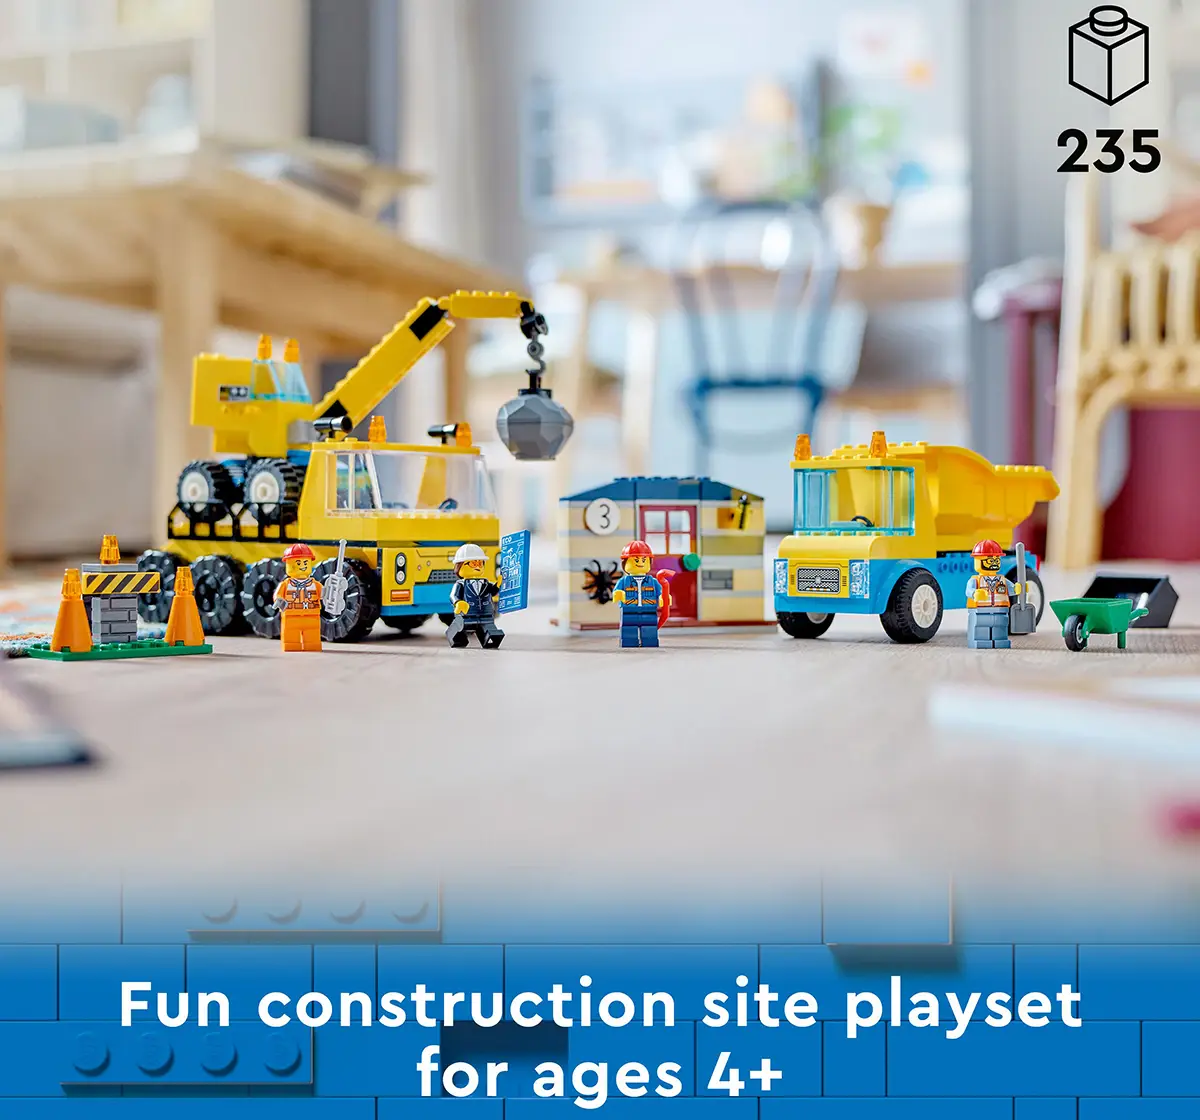 Lego City Construction Trucks And Wrecking Ball Crane 60391 (235 Pieces), 4Y+